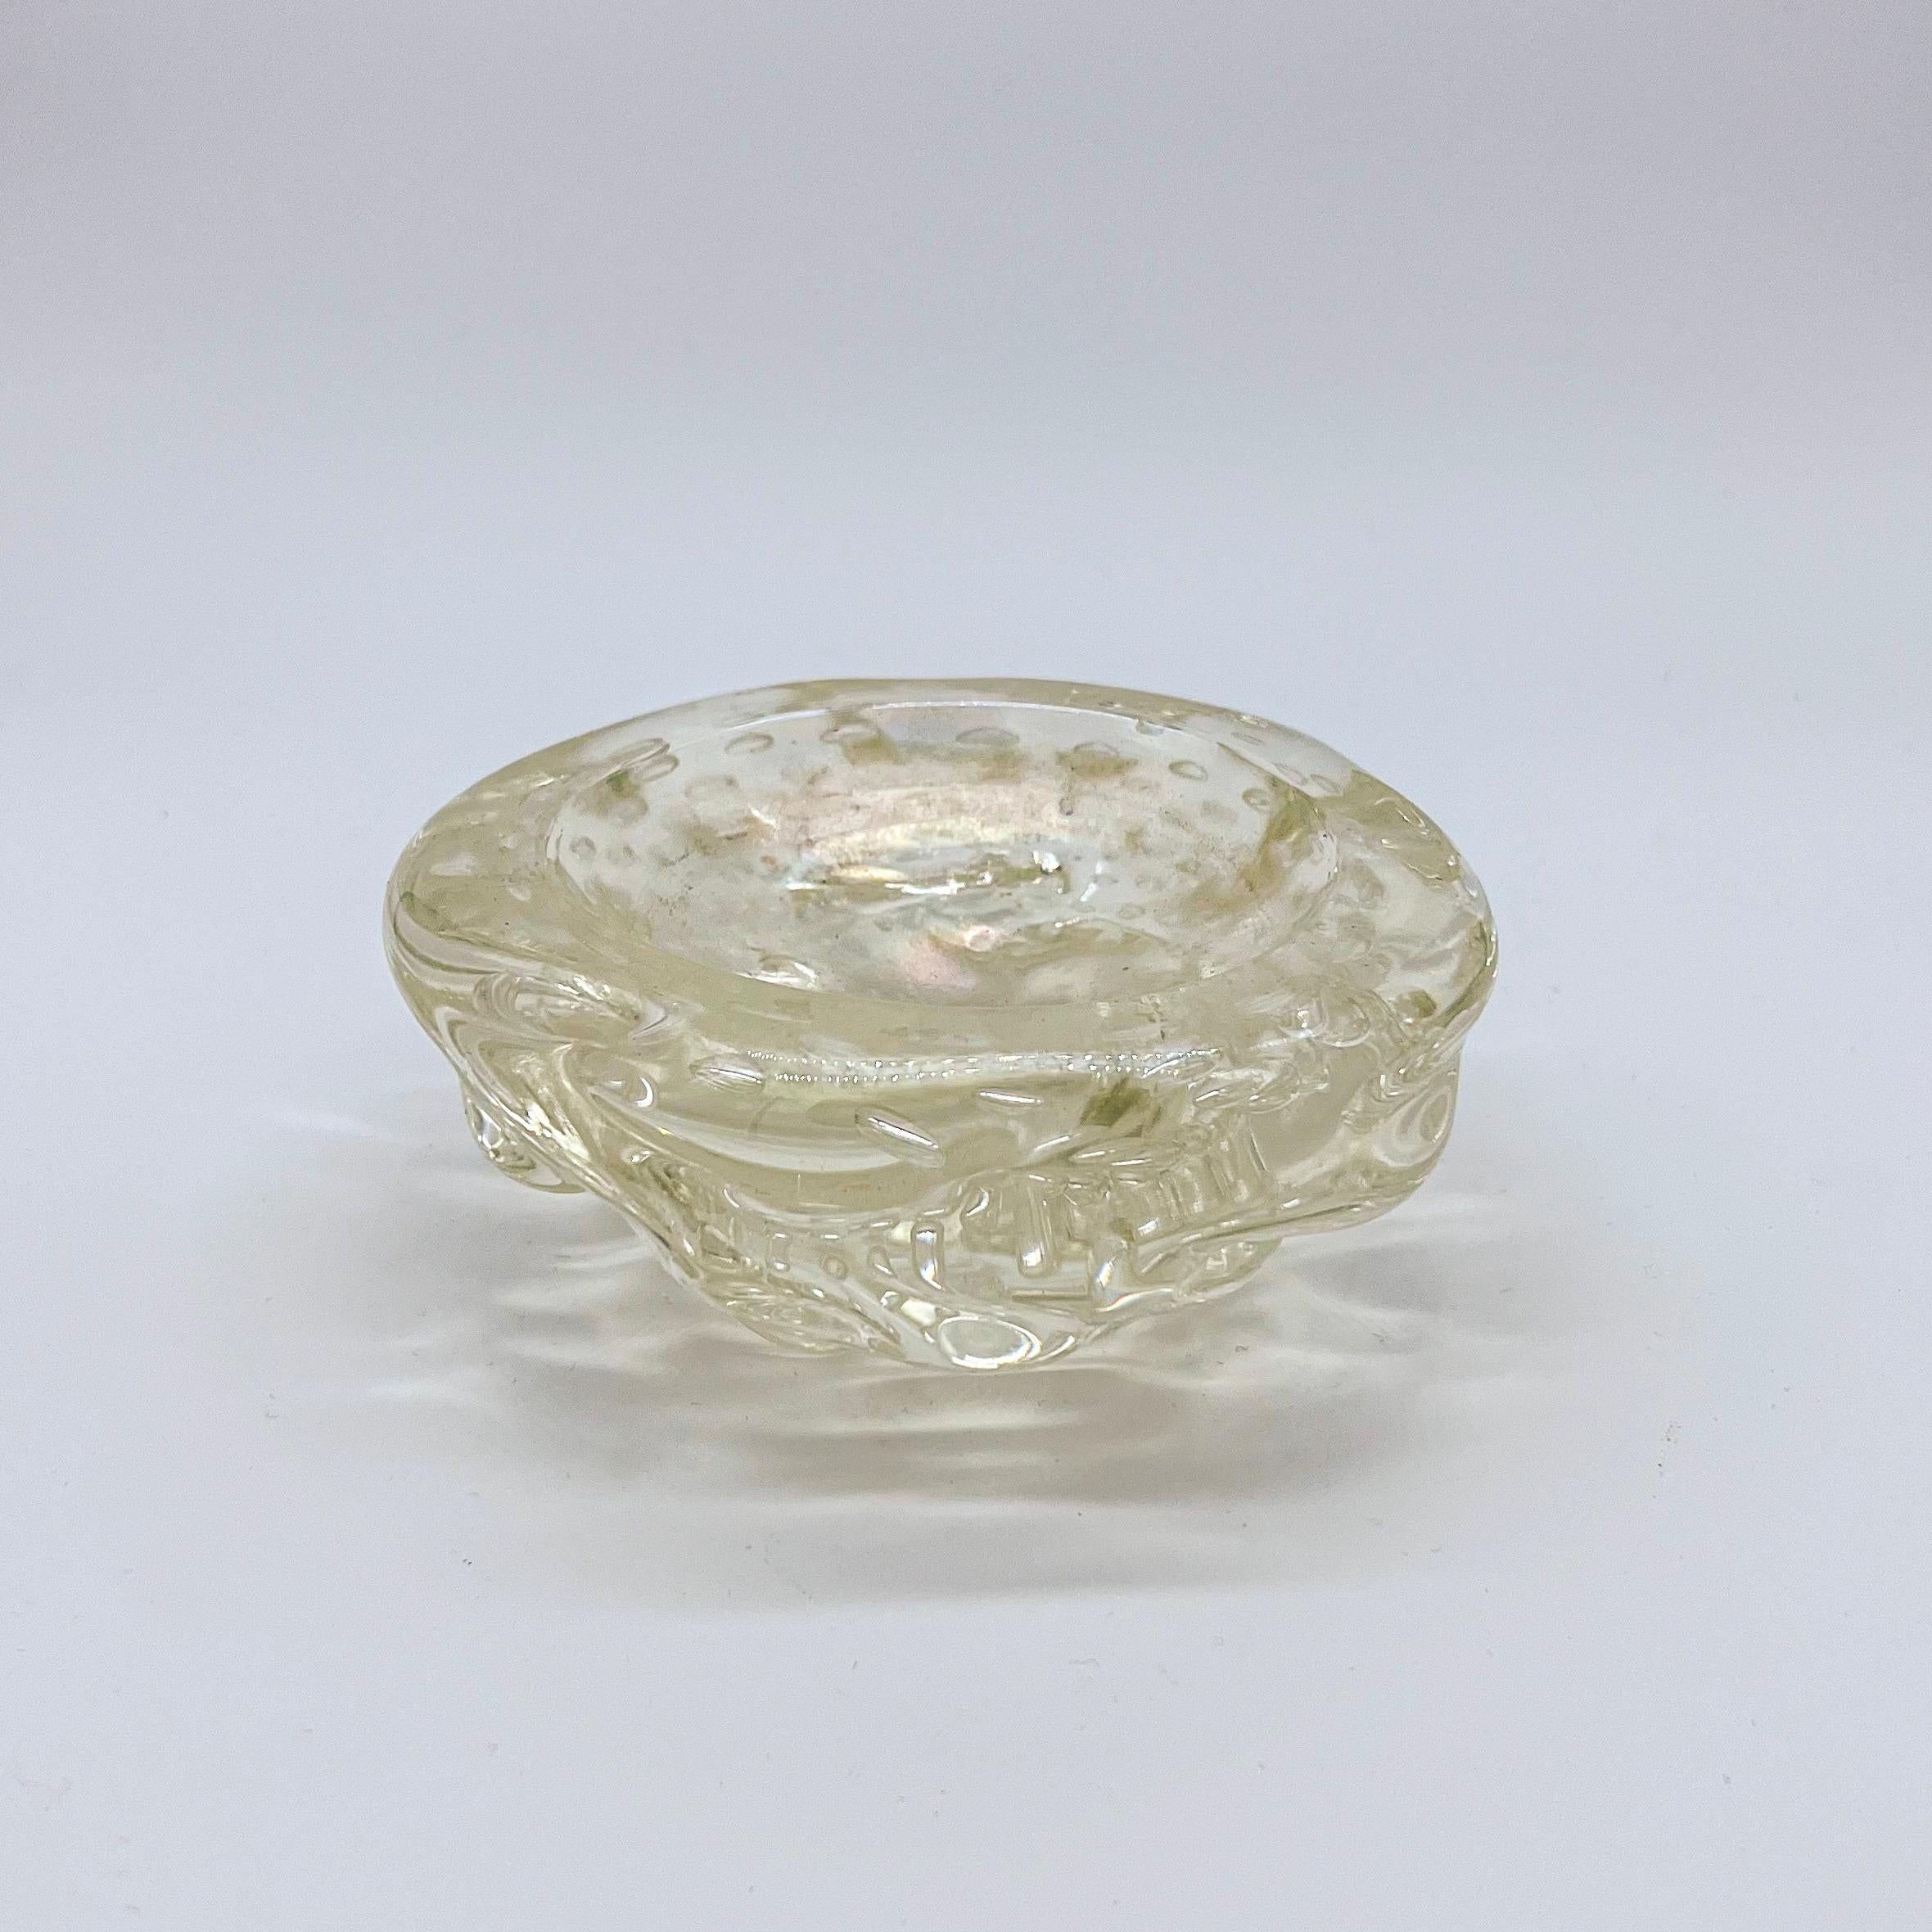 Vintage ashtray/bowl in Murano Glass, made in 